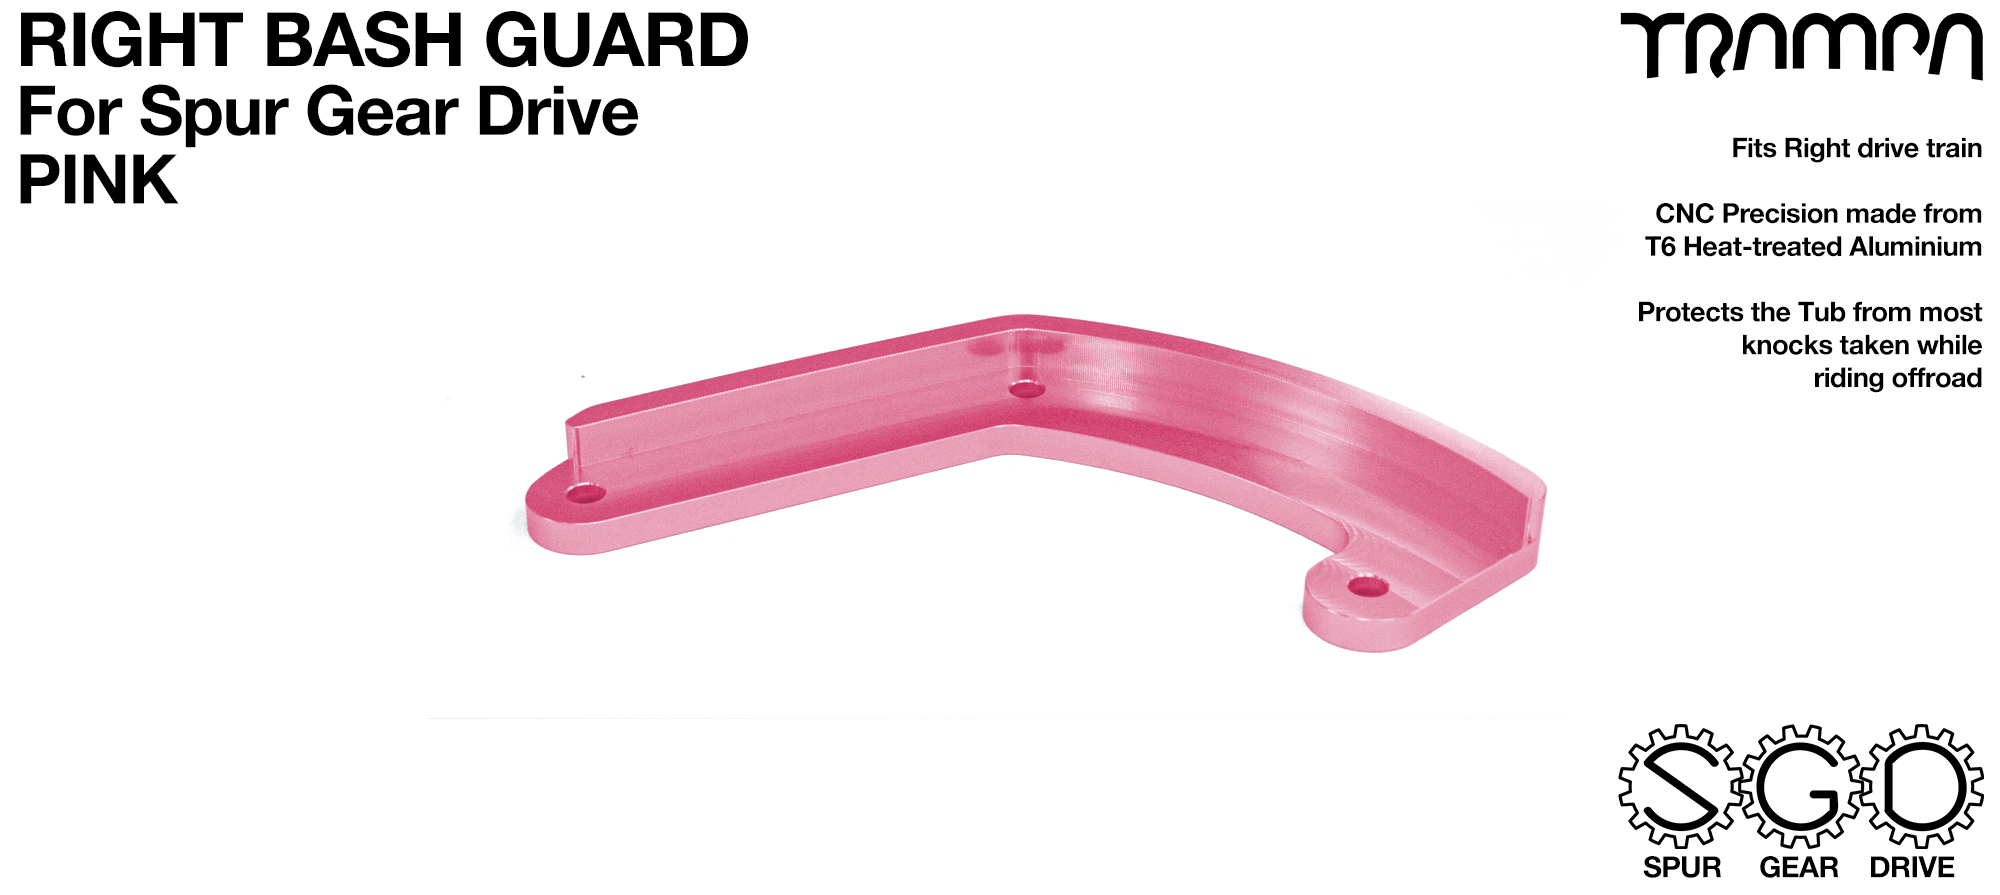 SPUR Gear Drive Bash Guard - RIGHT Side - PINK